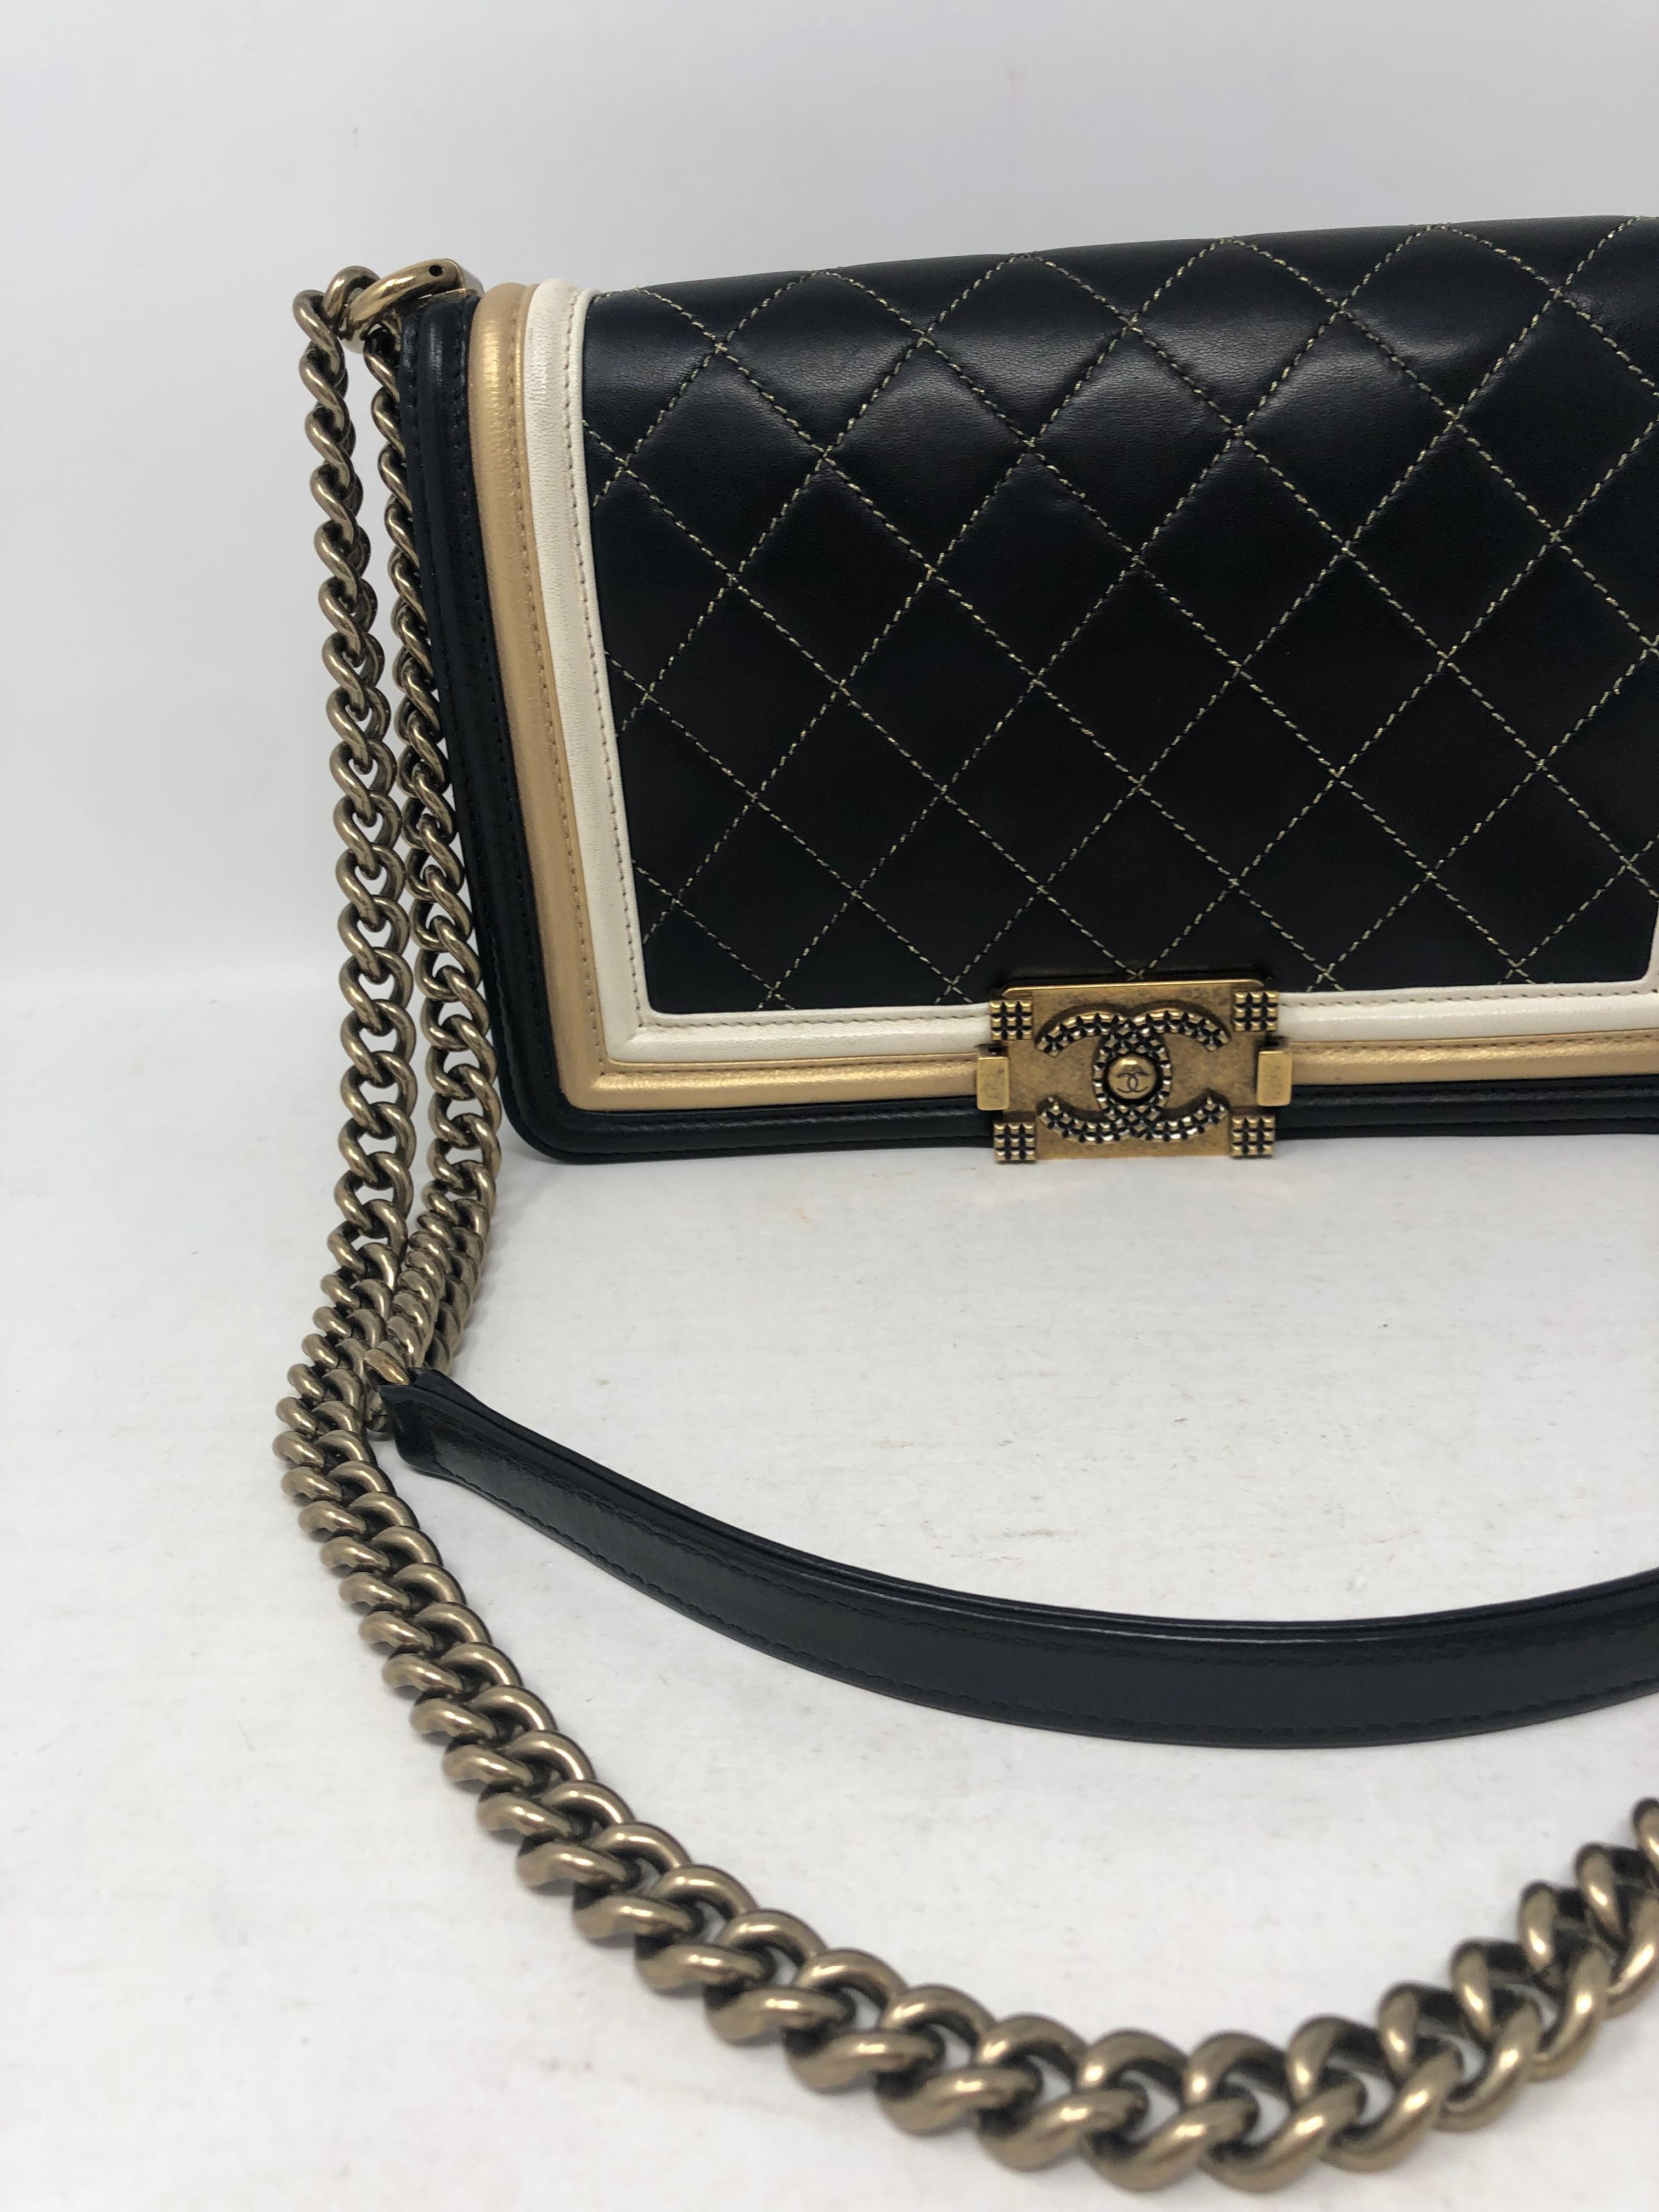 Rare Black Chanel Boy Bag with cream and gold trim. Limited gold hardware. Limited Cruise Collection 2012-2013. Mint condition. Includes authenticity card and dust cover. Guaranteed authentic. 